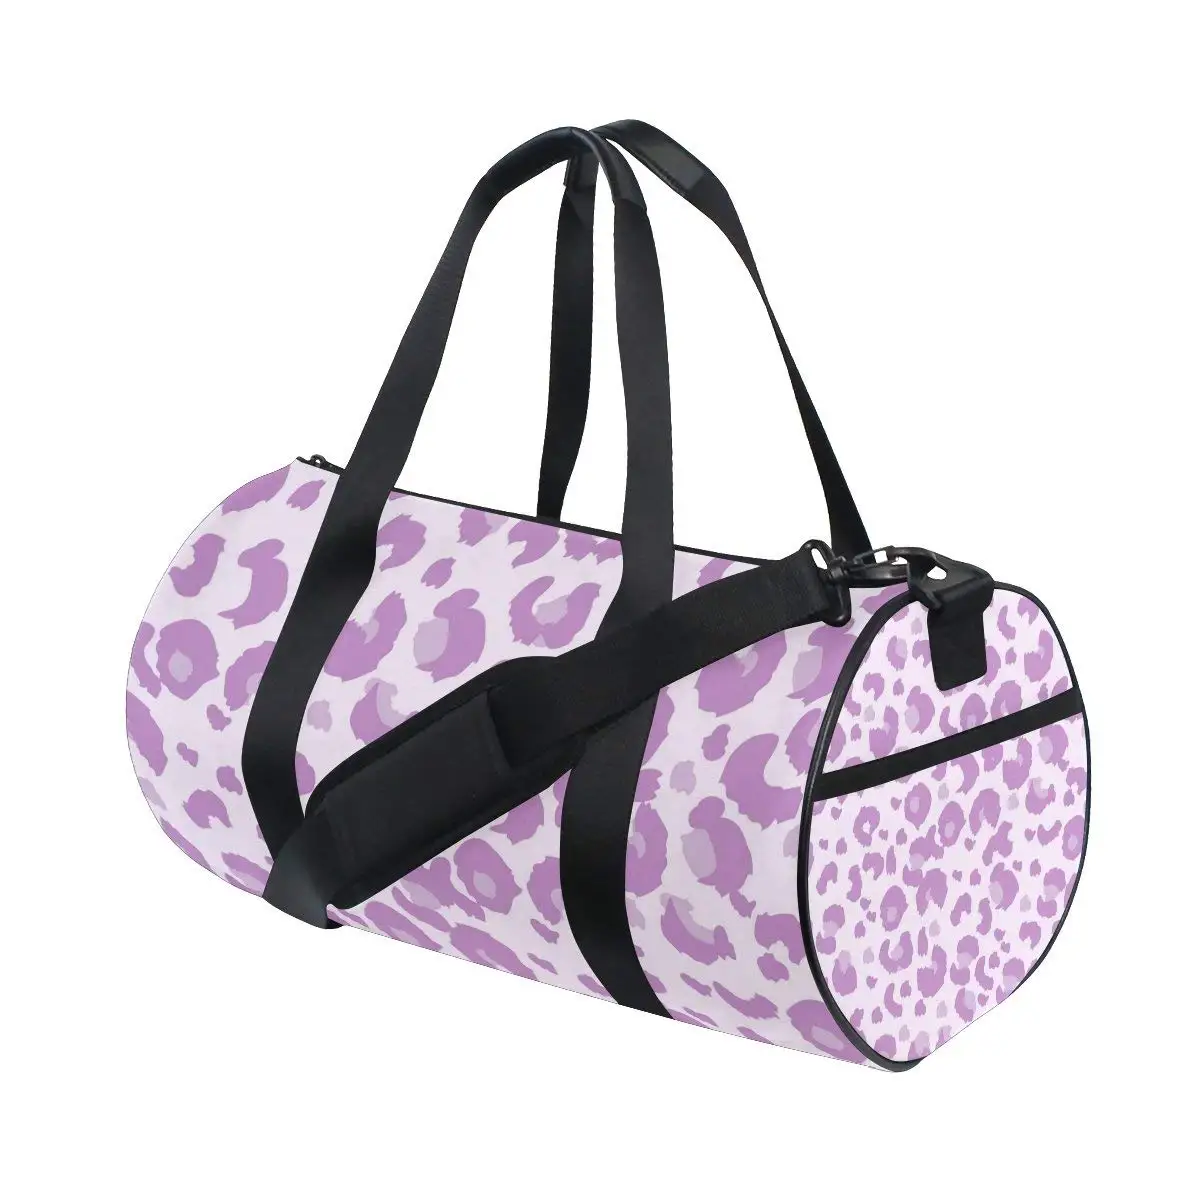 Animal Leopard Print Sports Gym Bag with Shoes Compartment Travel Duffel Bag for Men Women